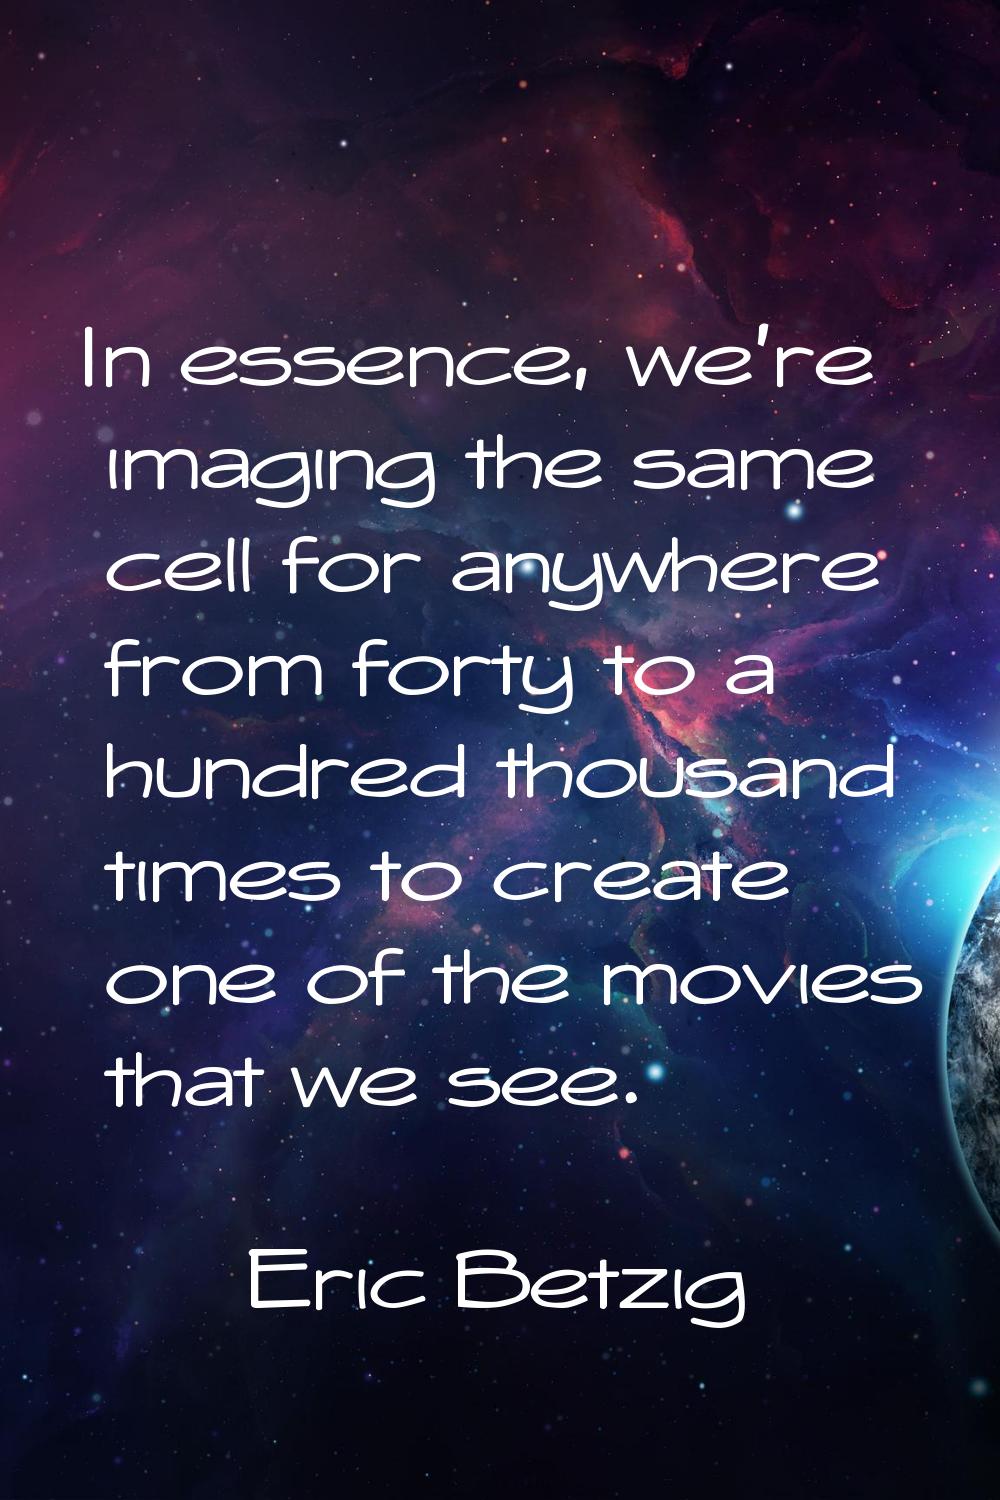 In essence, we're imaging the same cell for anywhere from forty to a hundred thousand times to crea